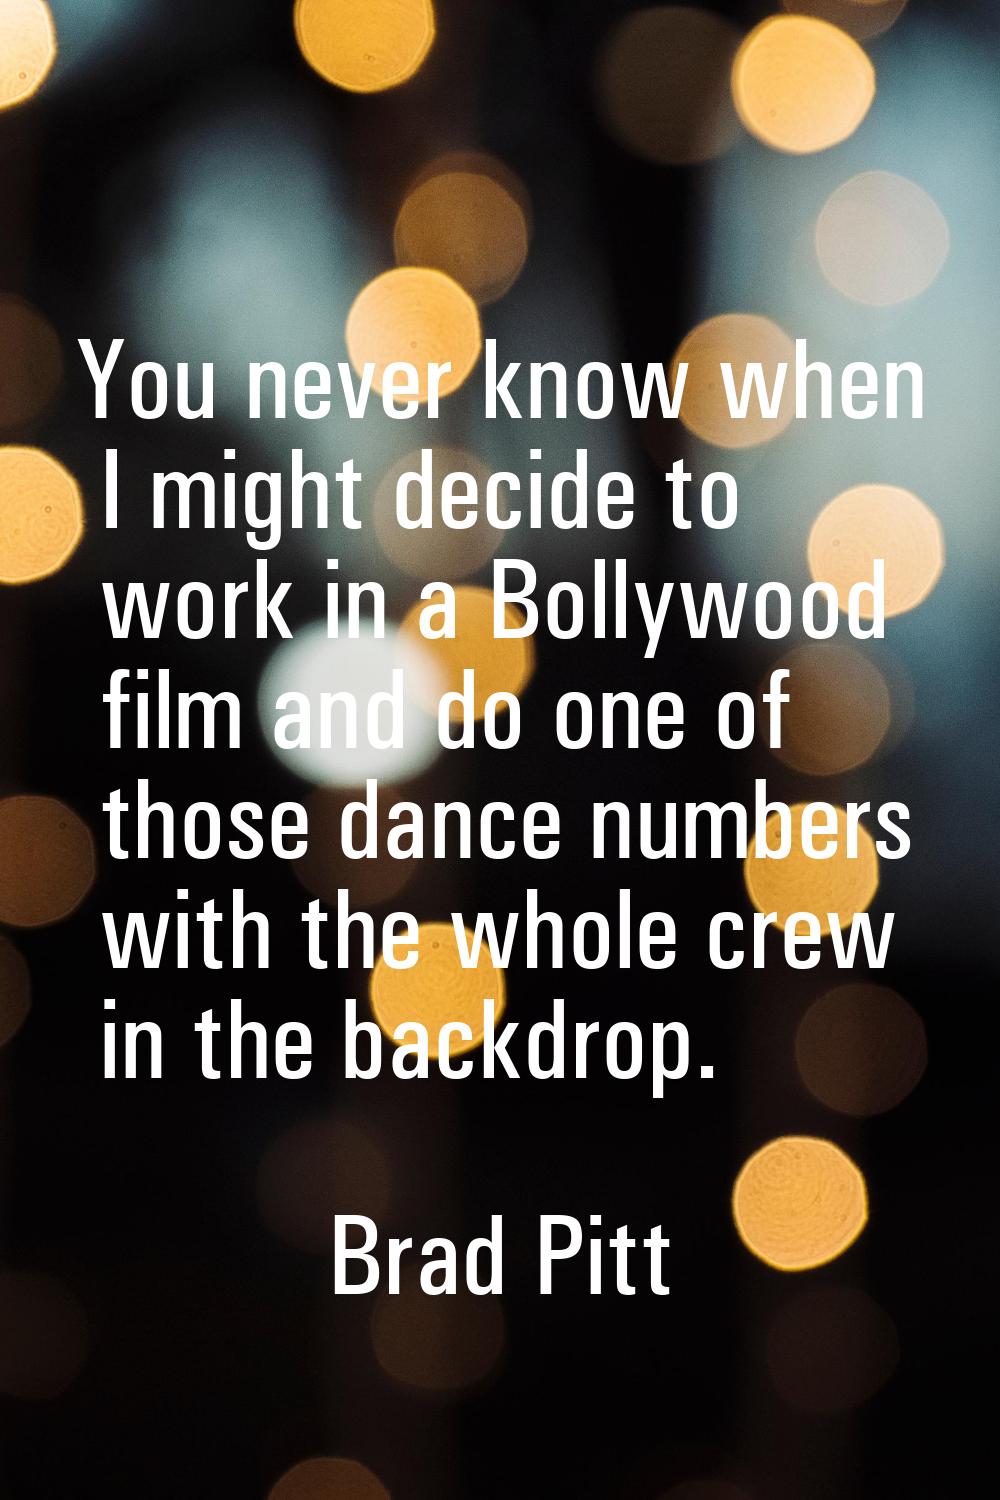 You never know when I might decide to work in a Bollywood film and do one of those dance numbers wi